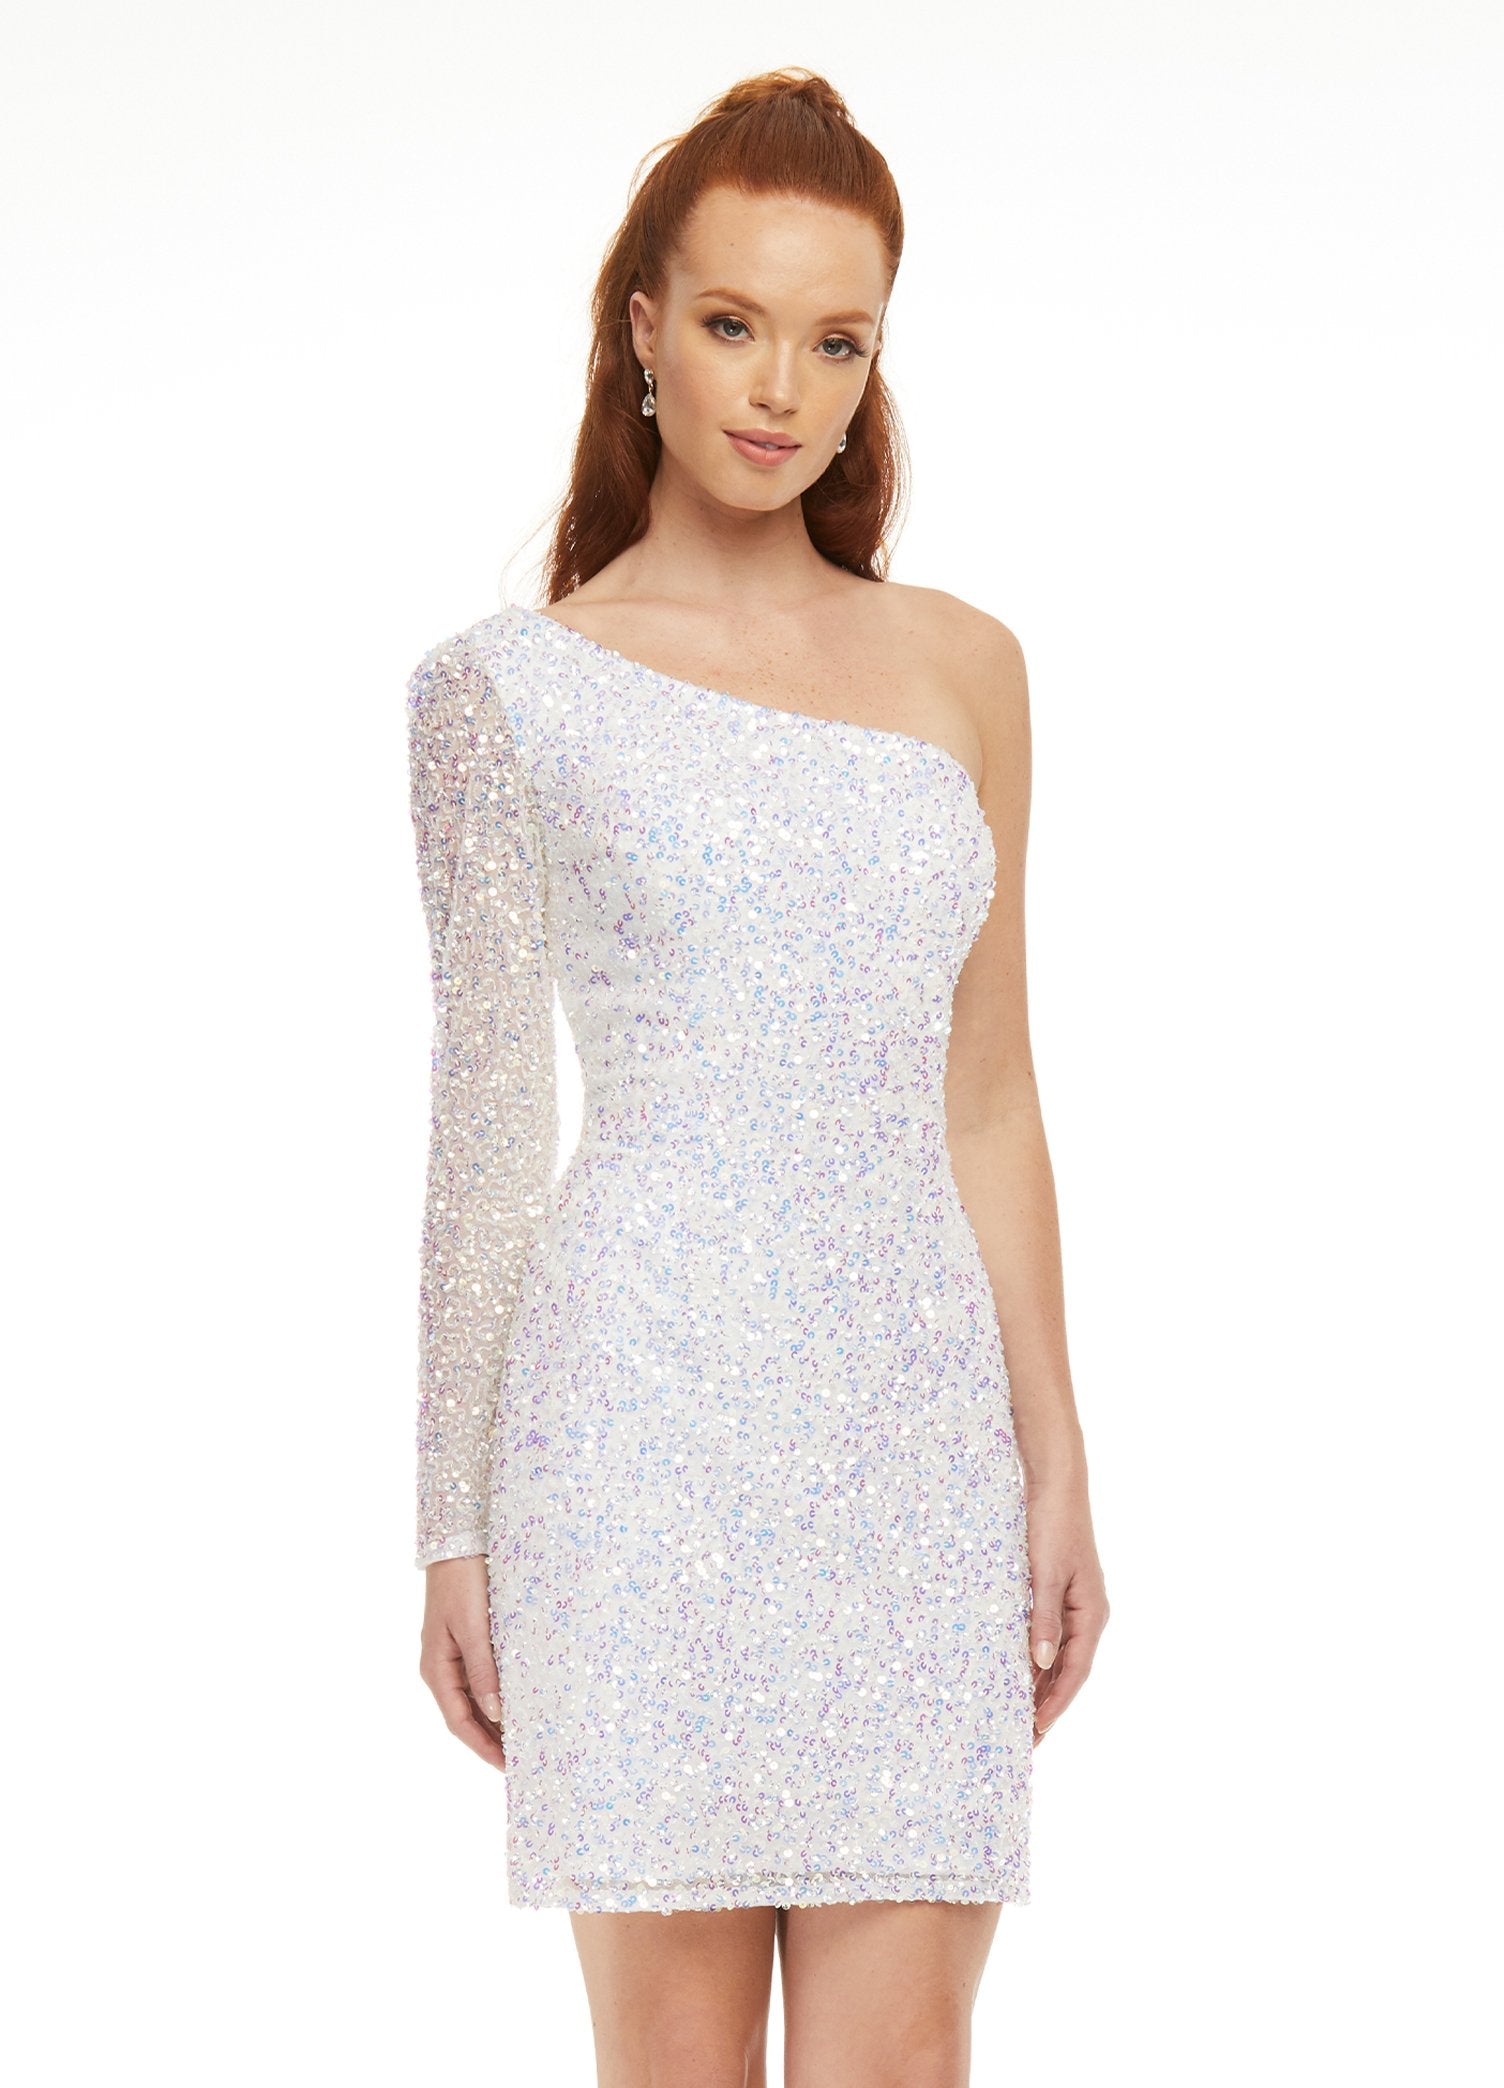 Ashley-Lauren-4457-AB-Ivory-cocktail-dress-front-one-shoulder-long-sleeve-fitted-sequin